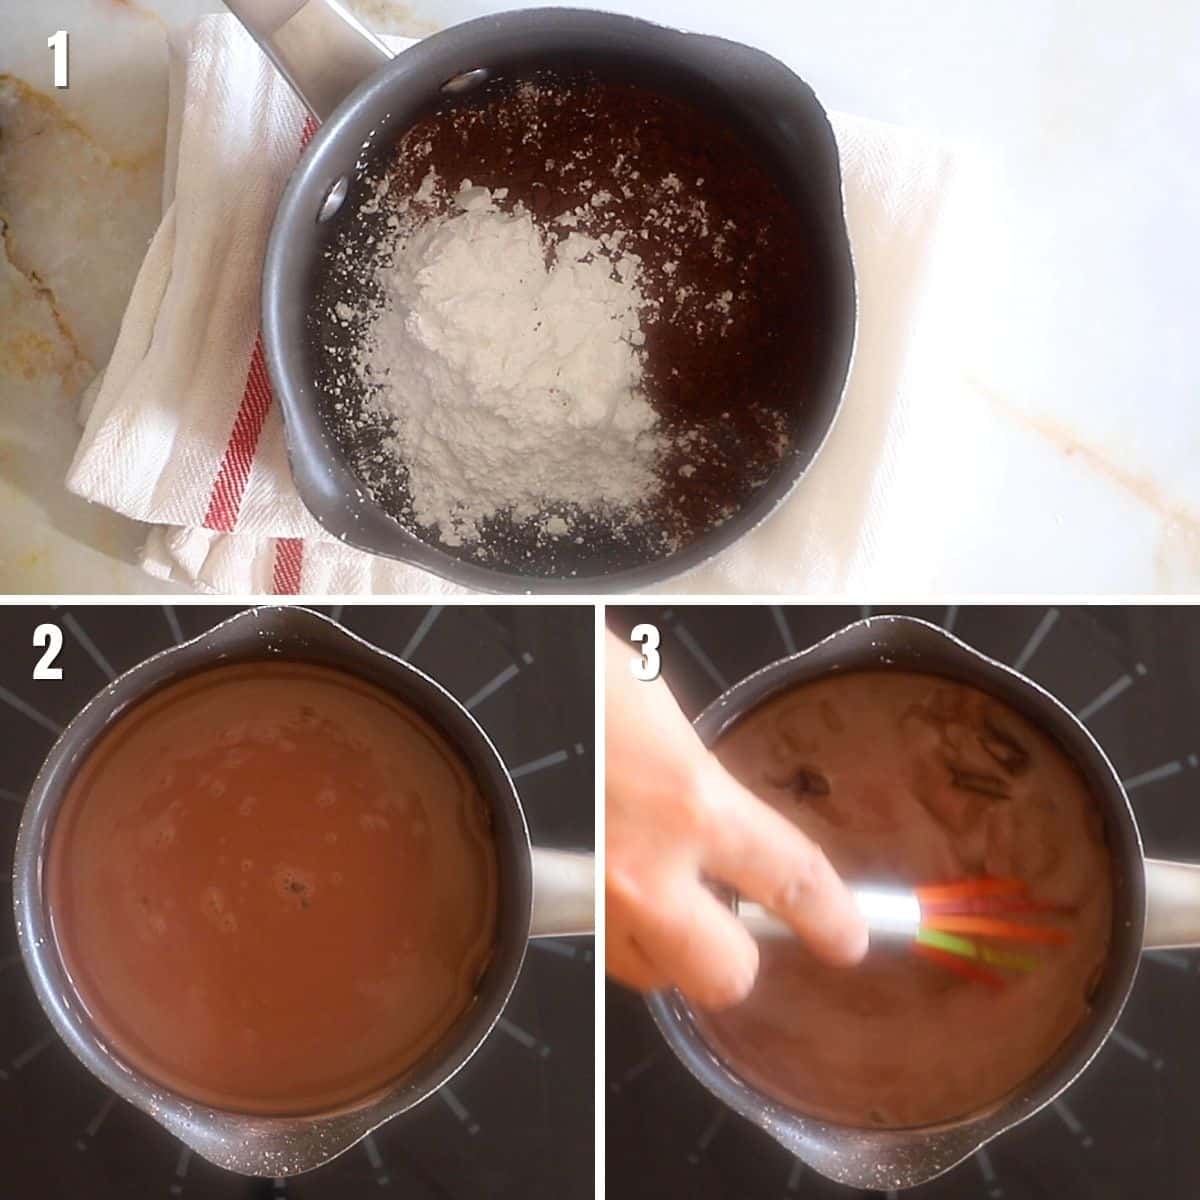 A collage of three images showing how to make Italian hot chocolate.